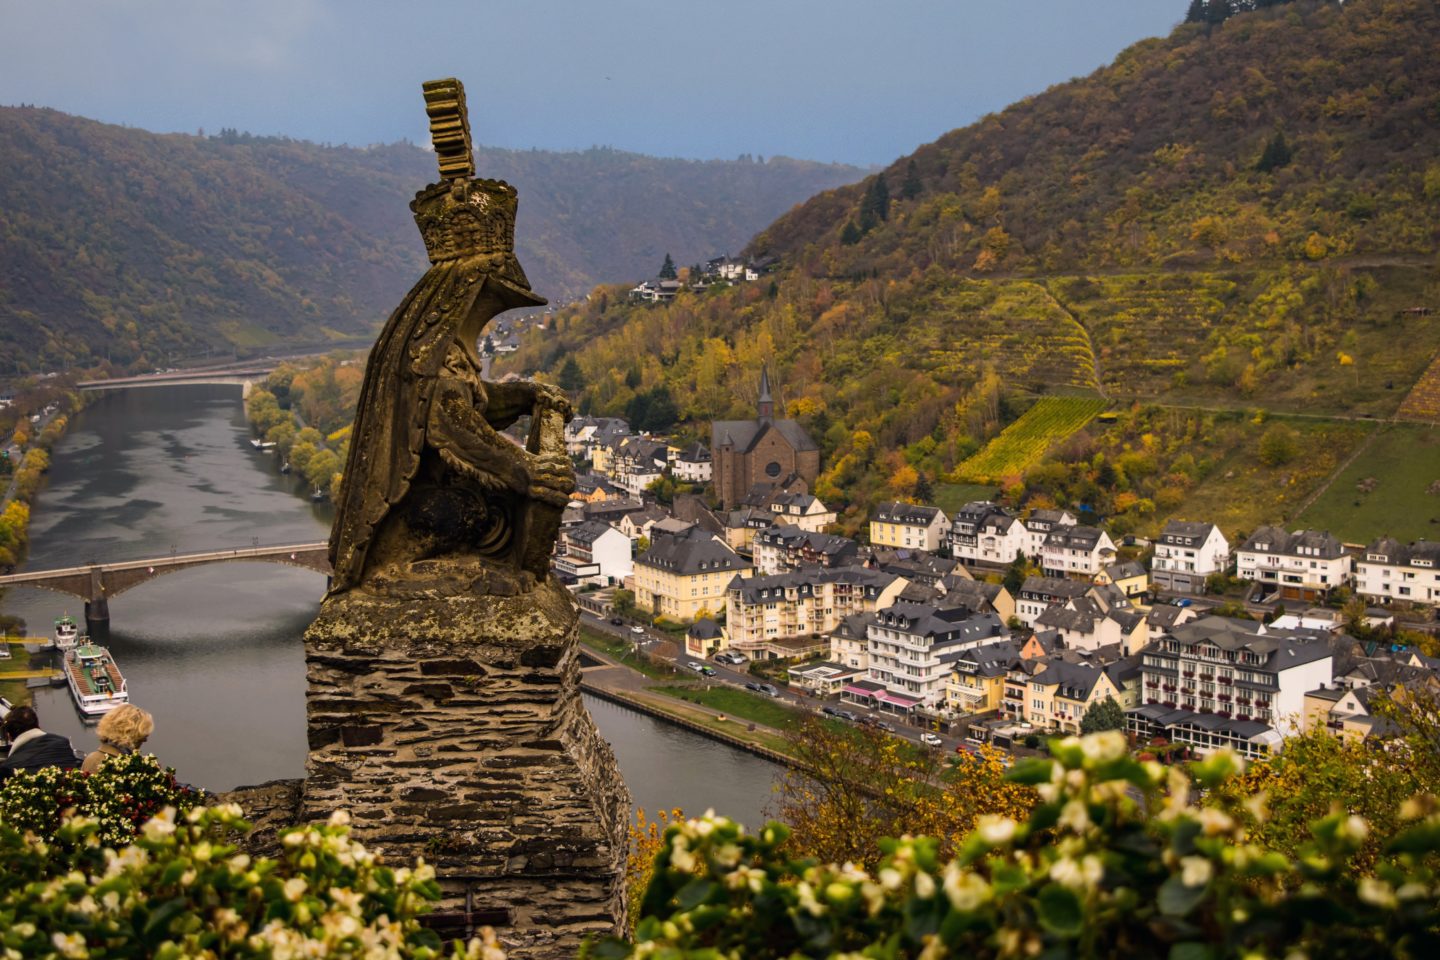 View from outside the Cochem Castle